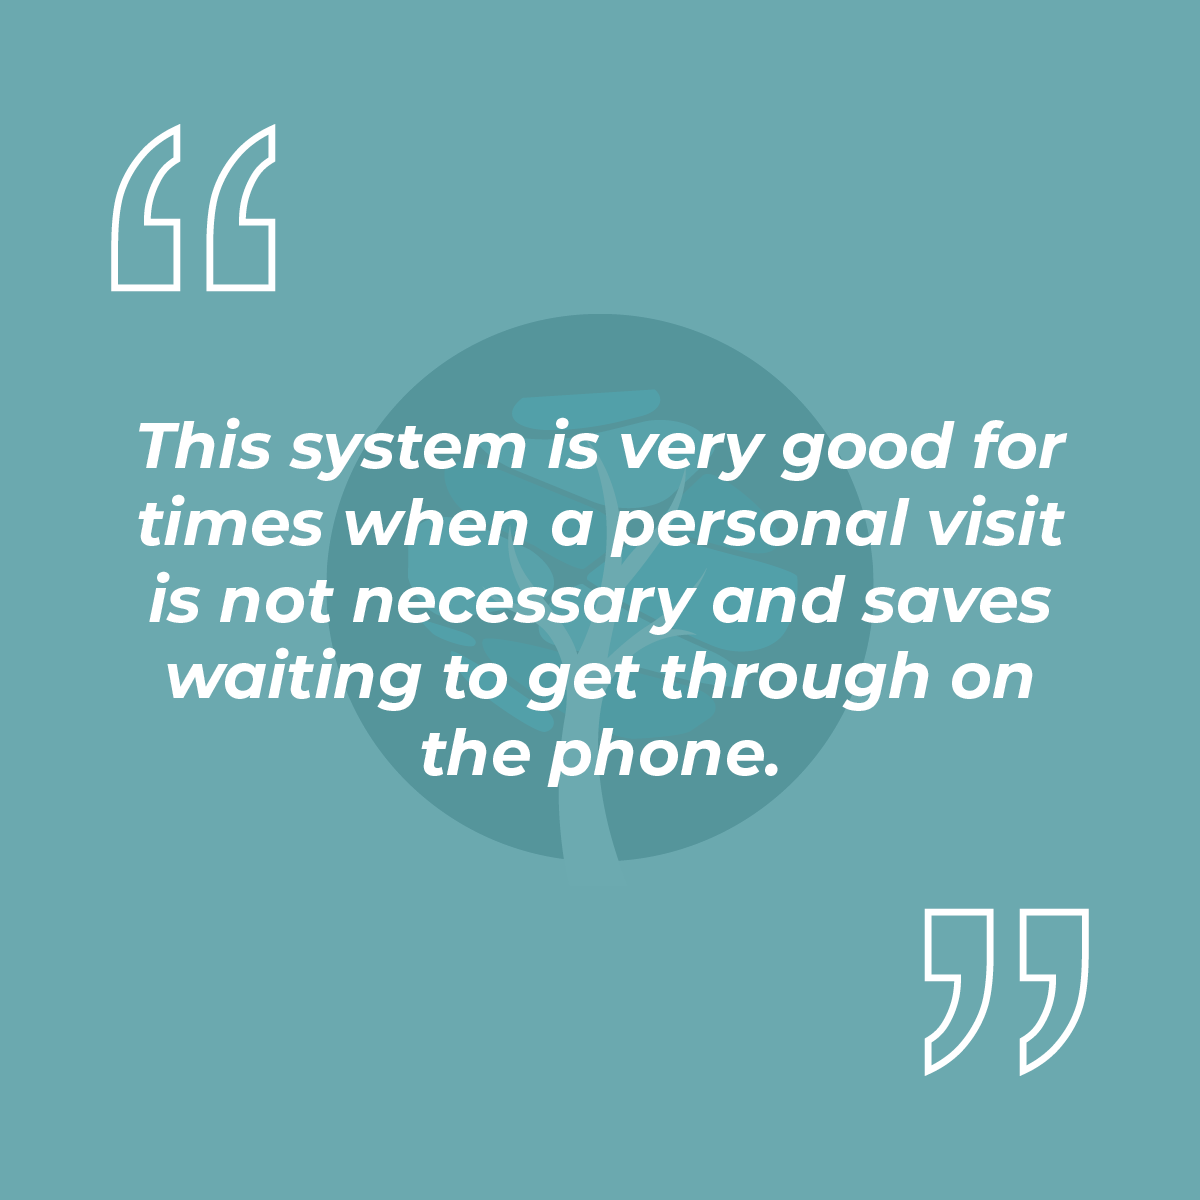 This system is very good for times when a personal visit is not necessary and saves waiting to get through on the phone.